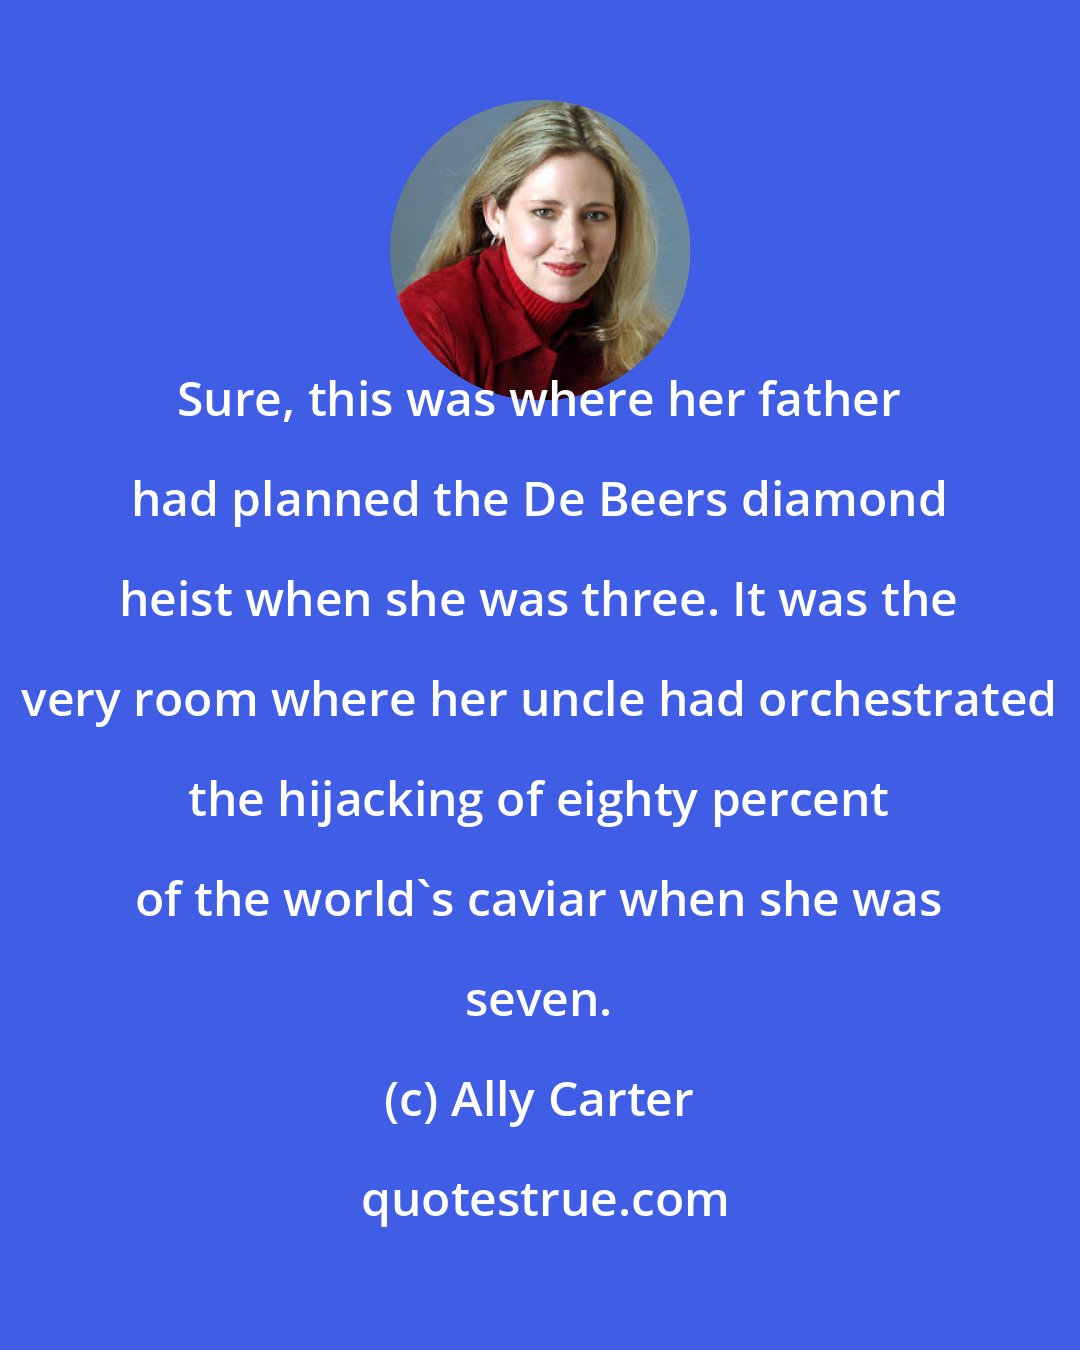 Ally Carter: Sure, this was where her father had planned the De Beers diamond heist when she was three. It was the very room where her uncle had orchestrated the hijacking of eighty percent of the world's caviar when she was seven.